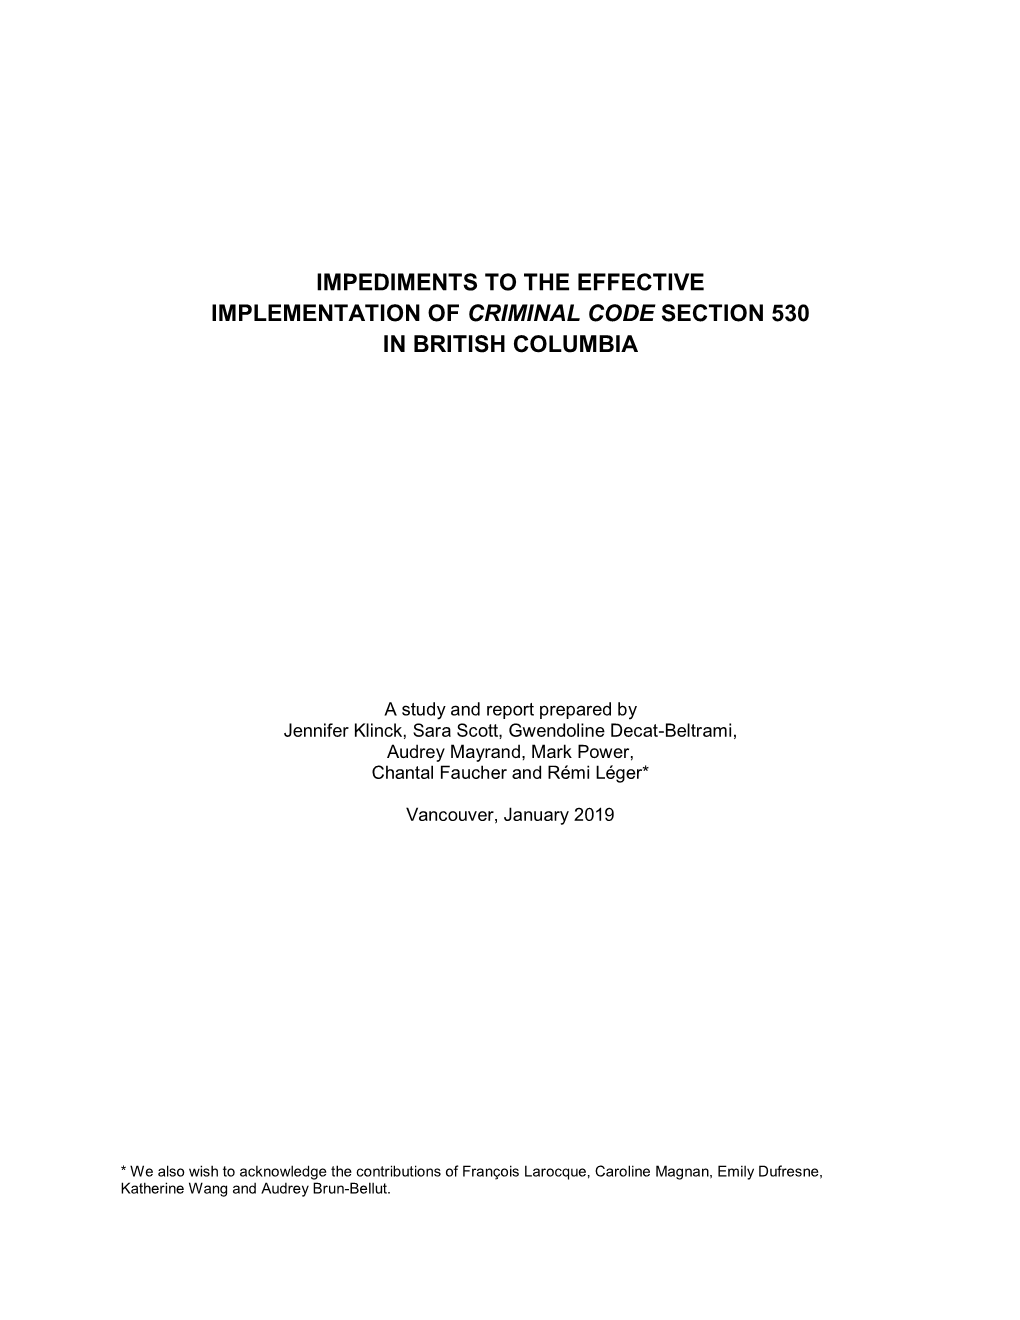 Impediments to the Effective Implementation of Criminal Code Section 530 in British Columbia